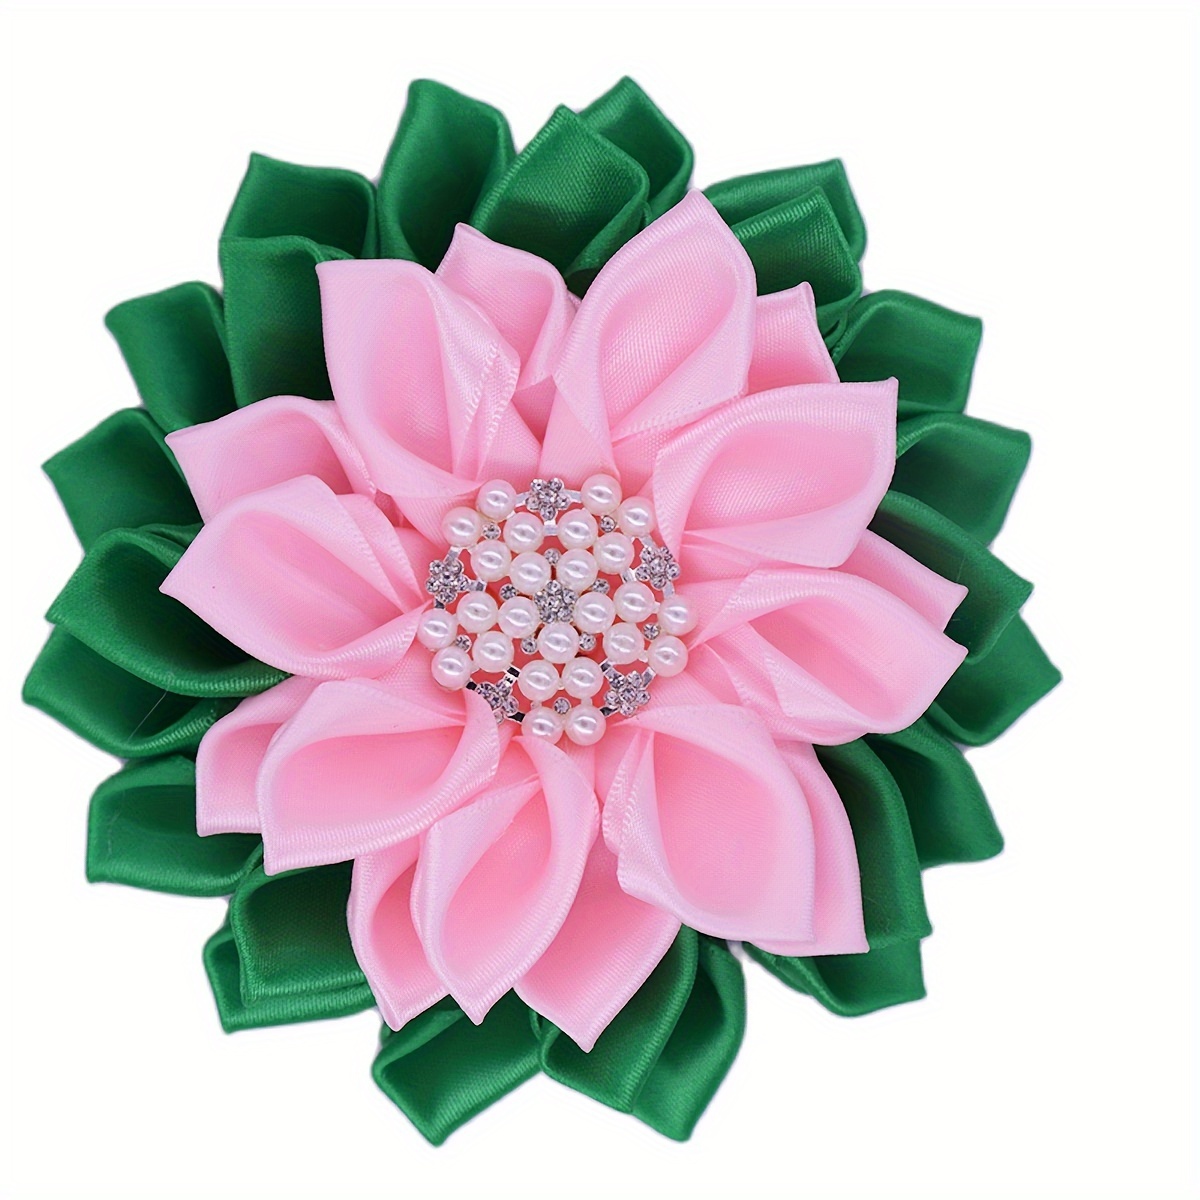 

Cute Rhodium Plated Alloy Brooch Pin With Pink Silk Flower, & Imitation Pearl Mosaic, Perfect For Sorority Gifts, Parties & Campus Events - Versatile Accessory For All Seasons